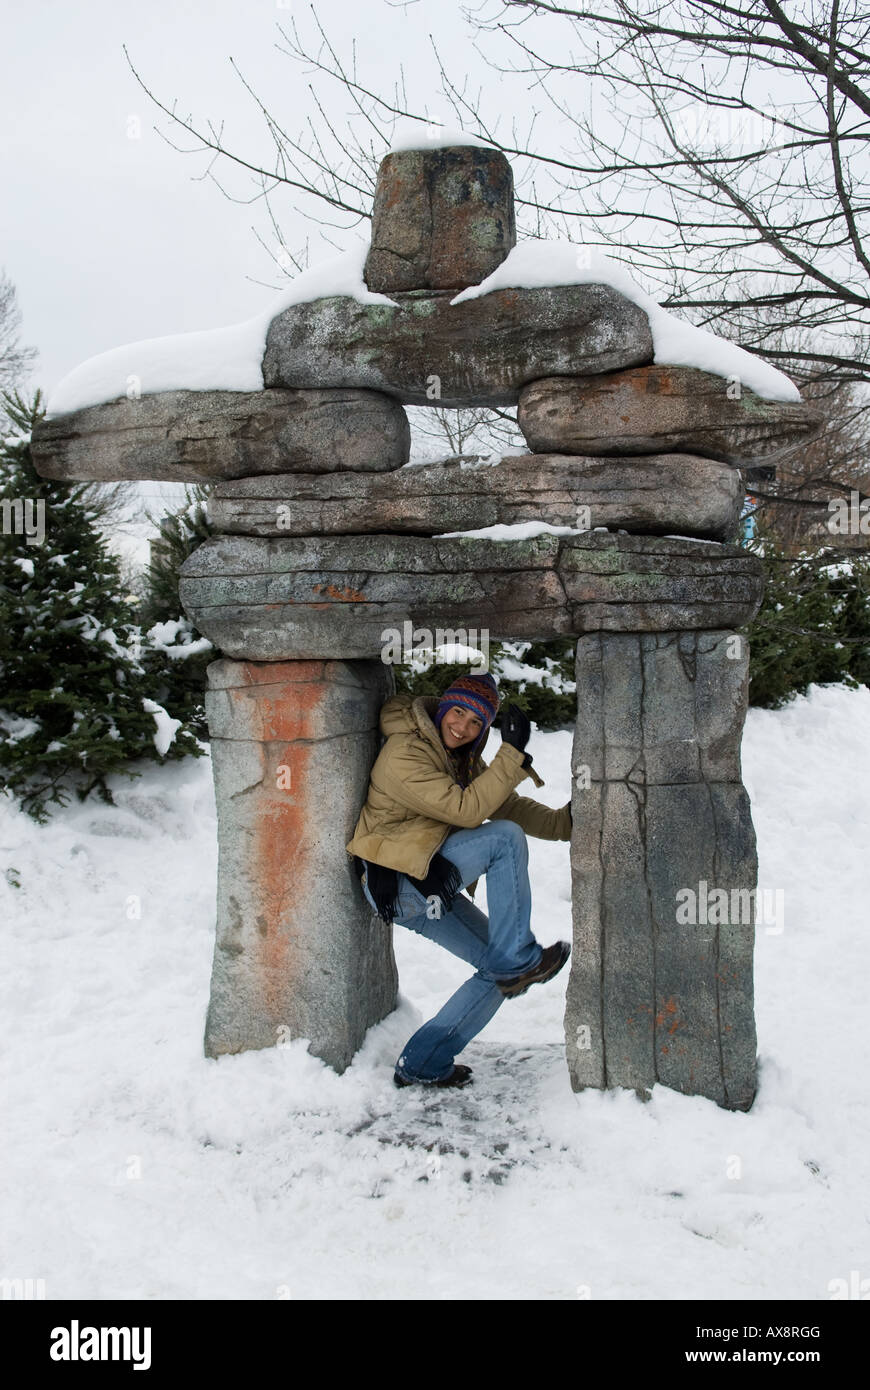 A native poses between the legs of an Inuskshuk Inuit art sculpture during annual Winterlude activities in Ottawa Canada Stock Photo